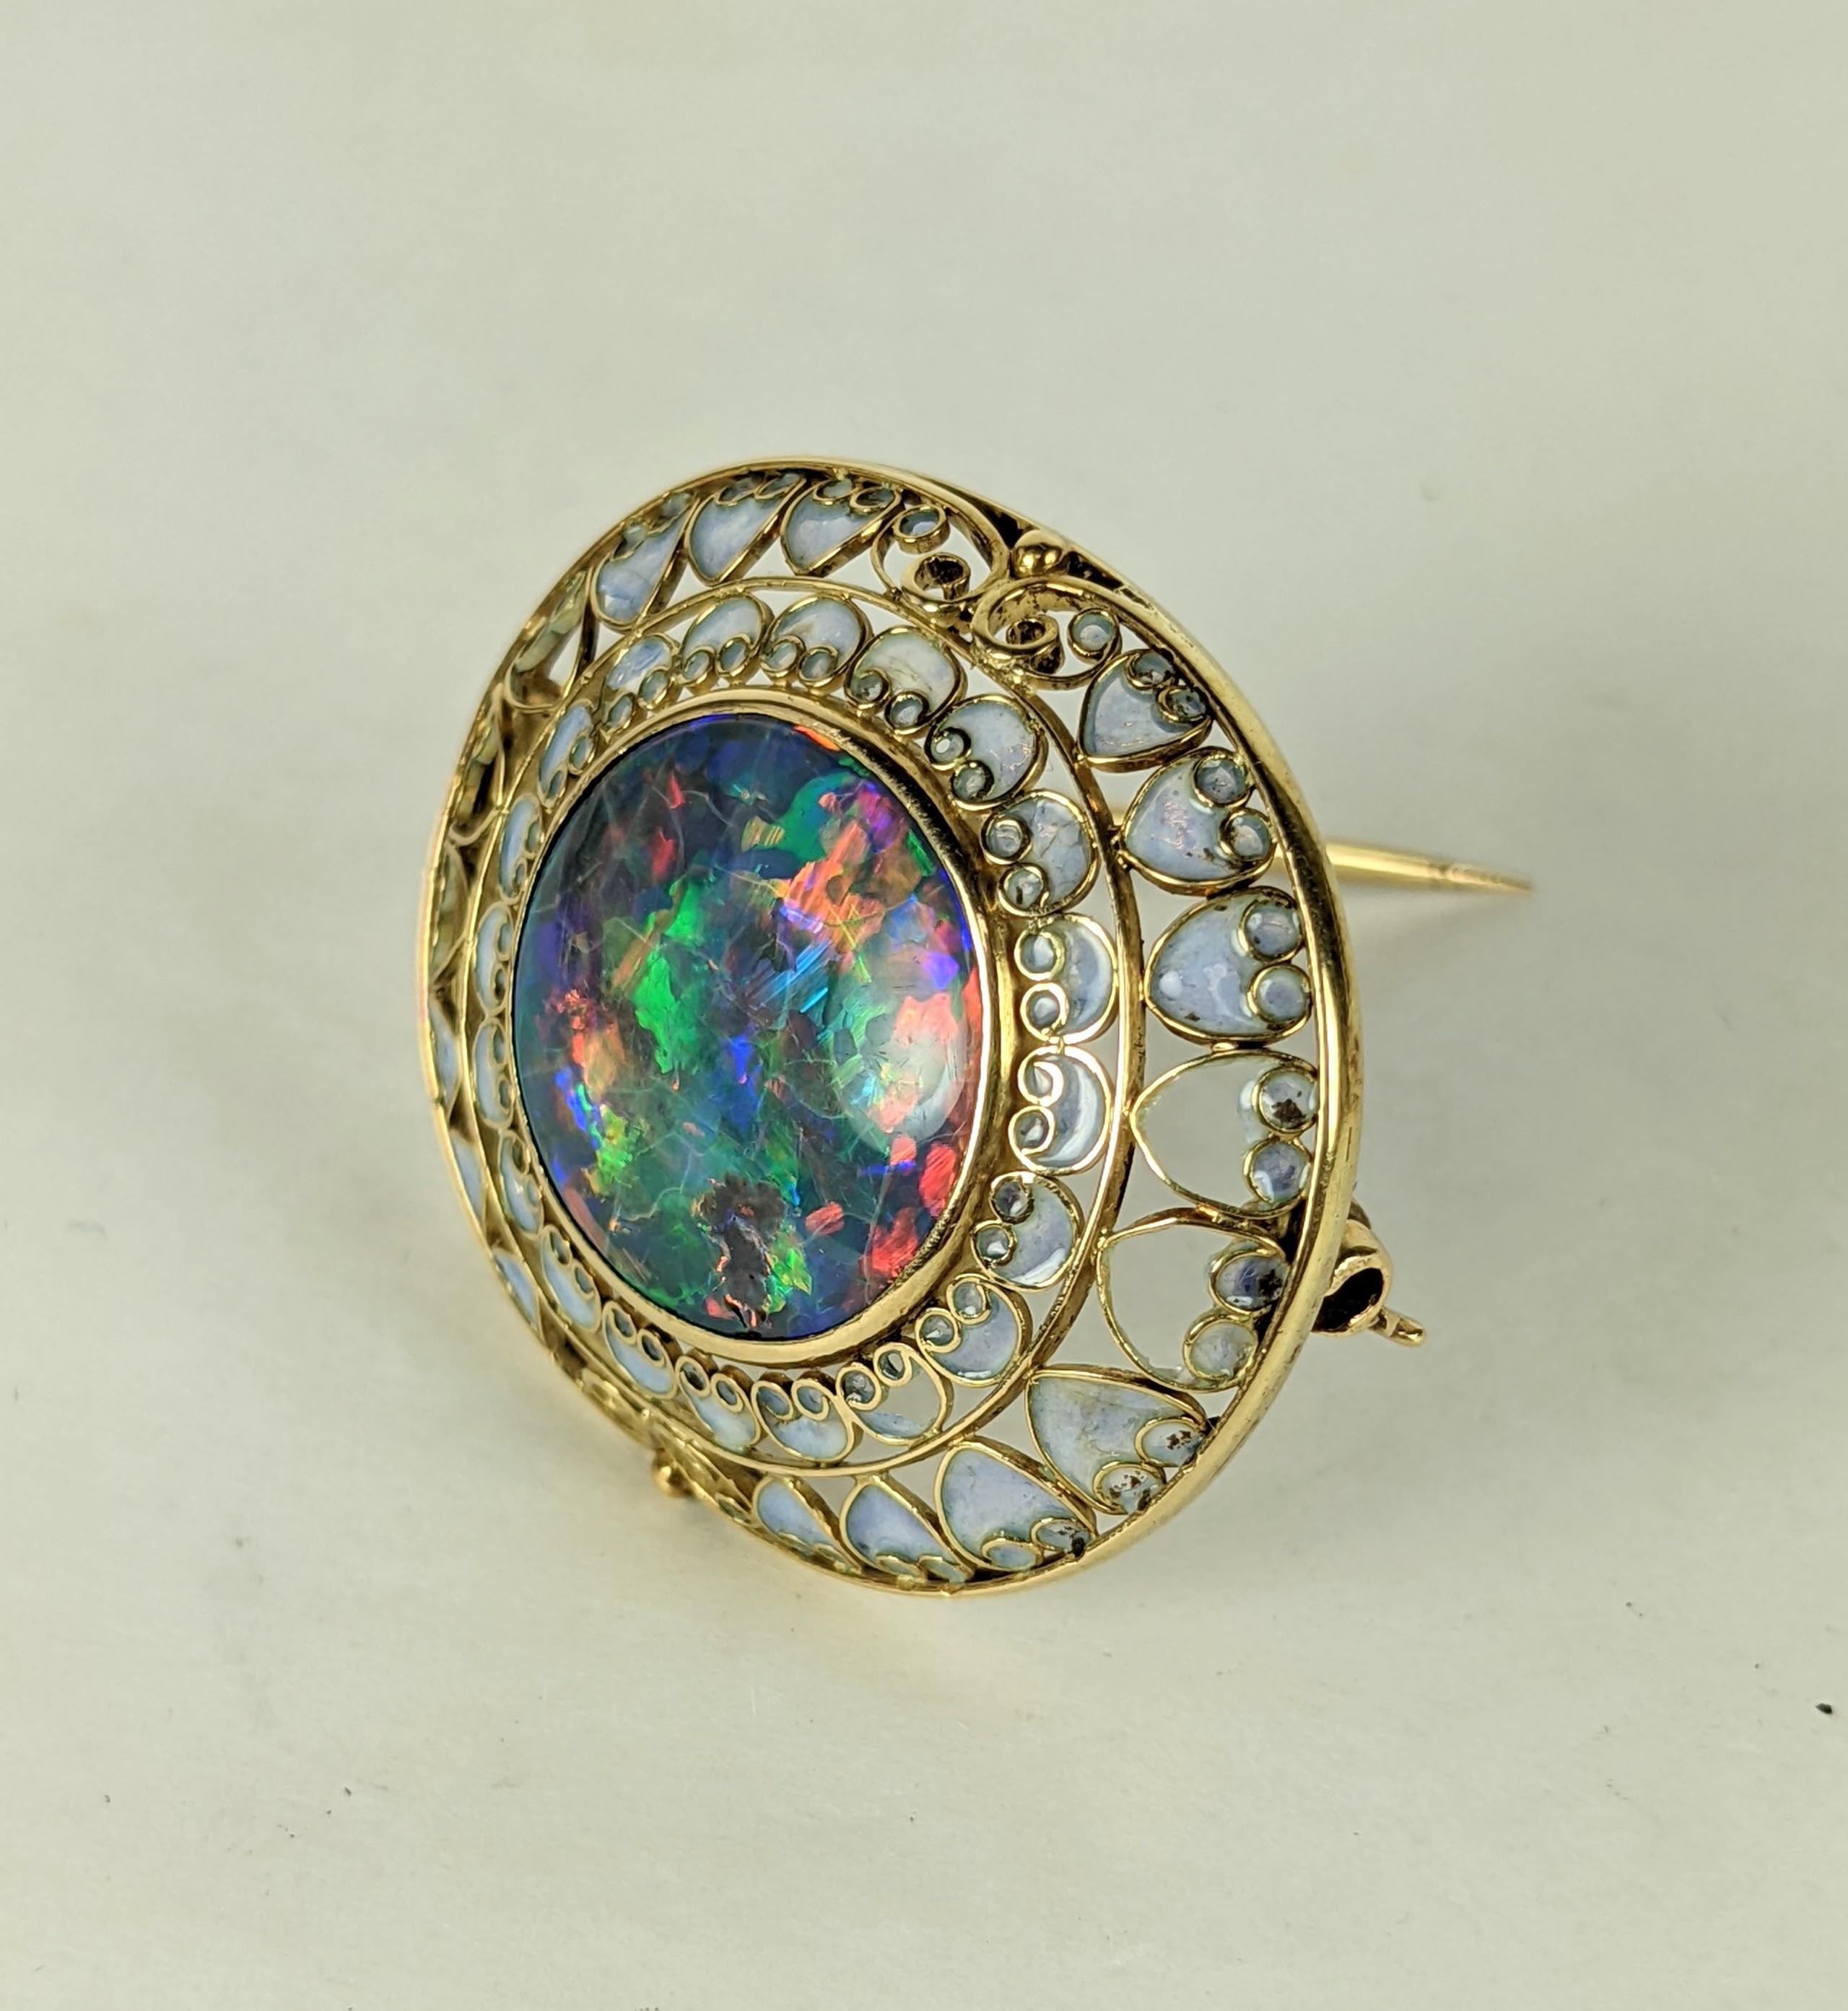 Tiffany Arts and Crafts Era Black Opal and Plique a Jour Brooch circa 1910's by Louis Comfort Tiffany with Julia Munson in 18k gold. Large peacock Black Opal round measuring .75